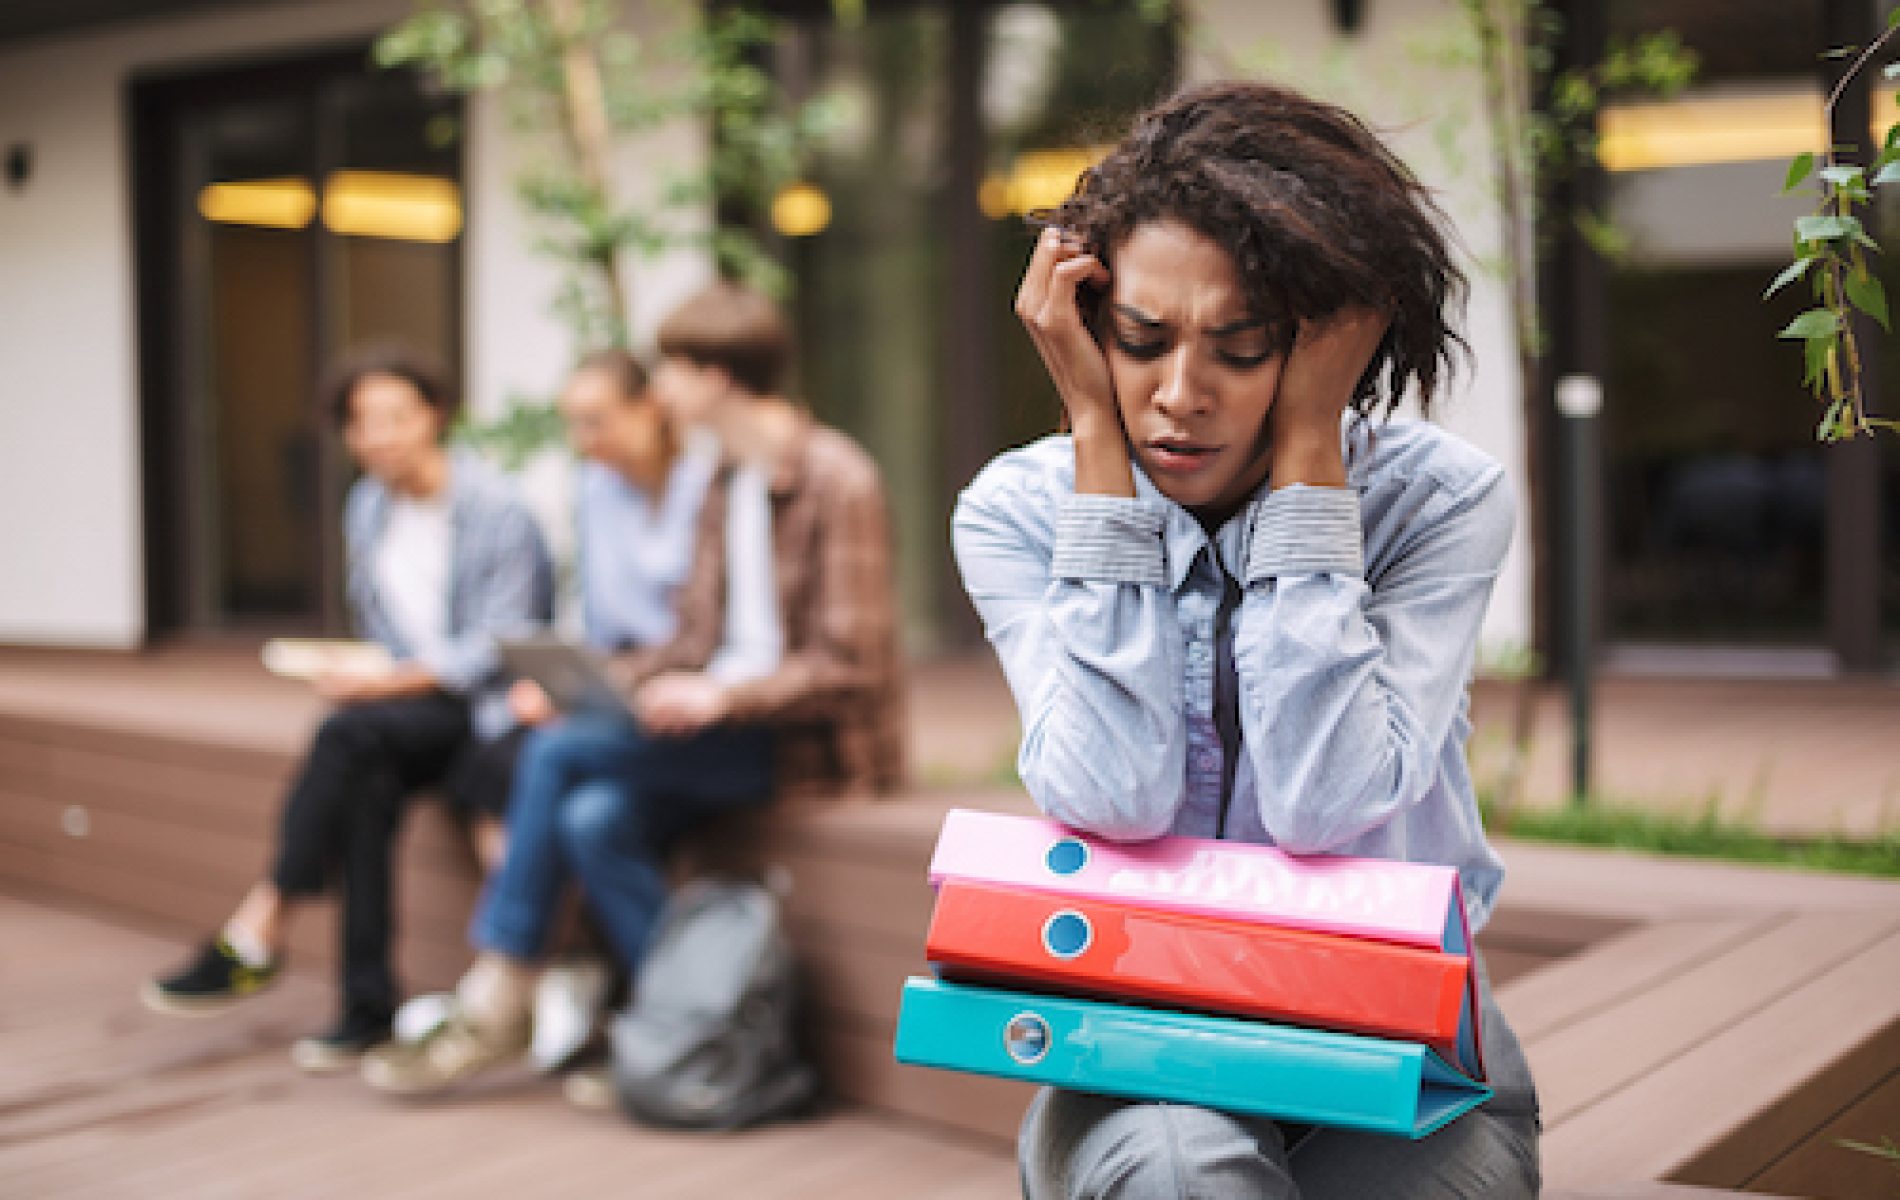 Portrait of upset lady sitting on bench with colorful folders on knees and sadly closing her eyes while spending time in courtyard of university